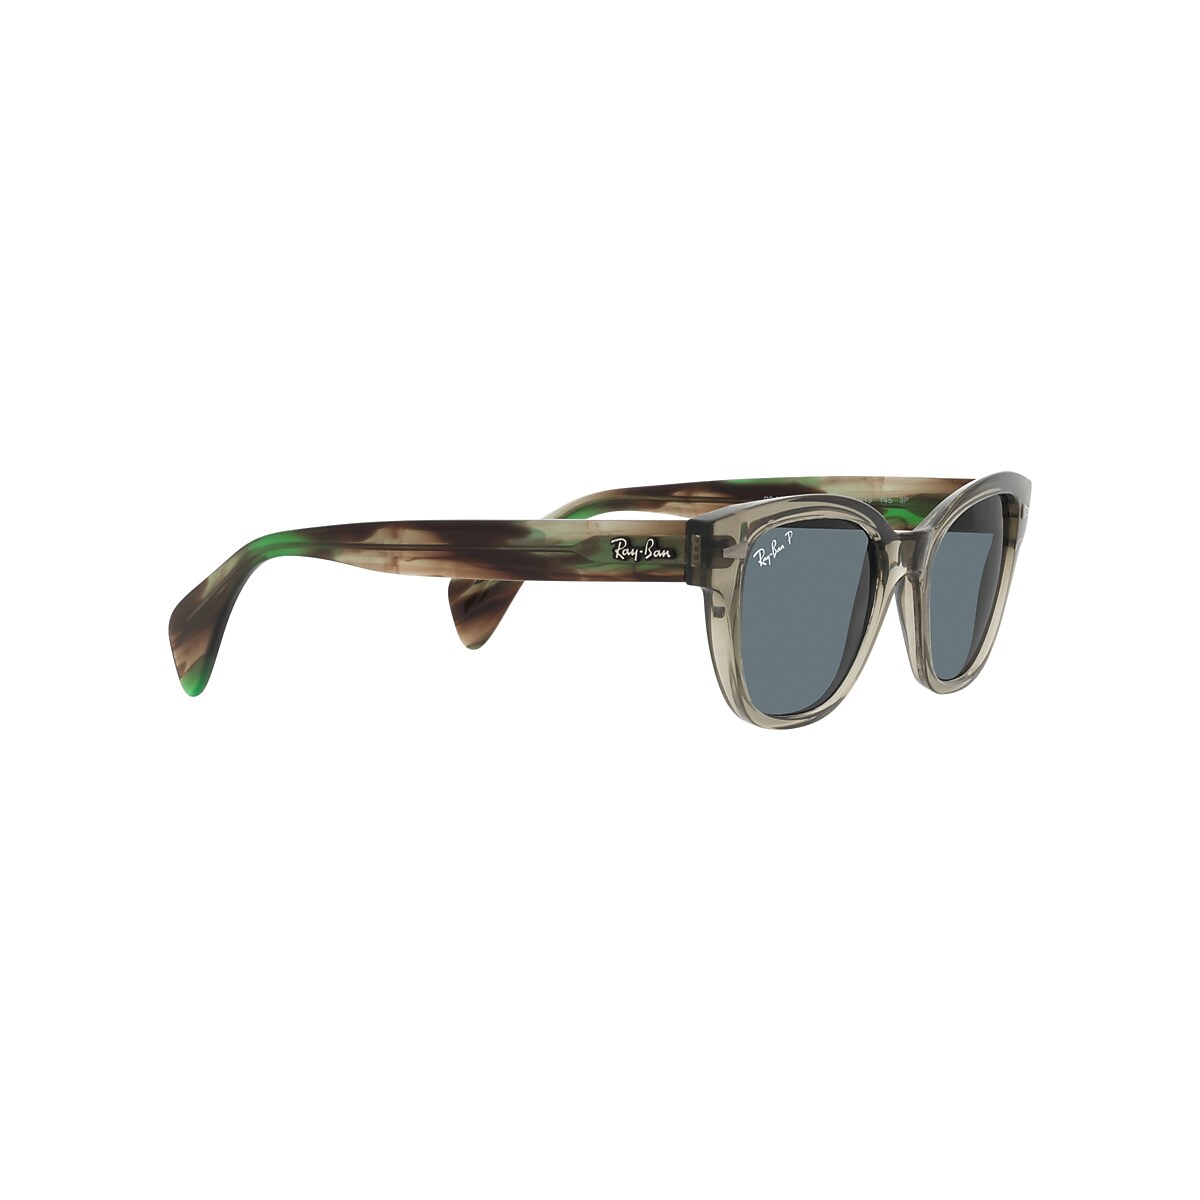 RB0880S Sunglasses in Transparent Green and Dark Blue - Ray-Ban